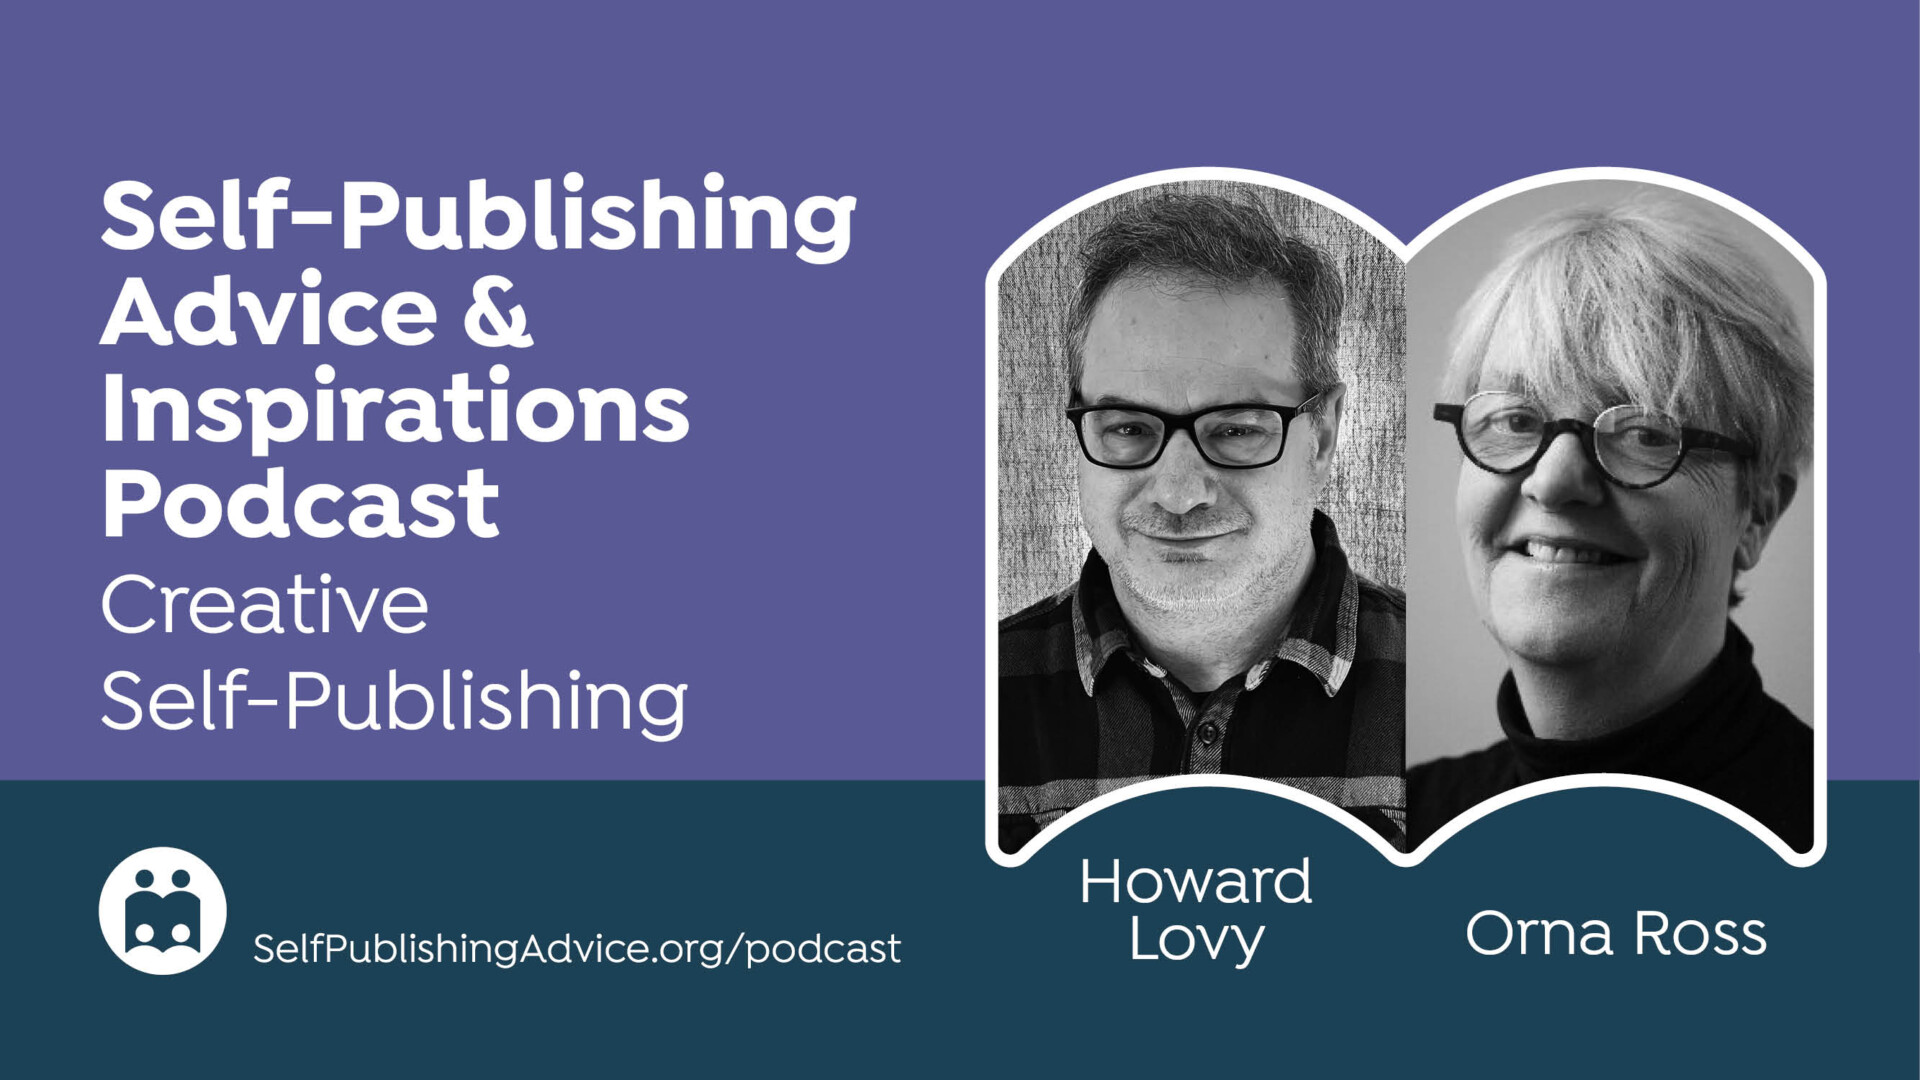 How To Spend Your Time, Energy, And Money: Creative Self-Publishing Podcast With Orna Ross And Howard Lovy